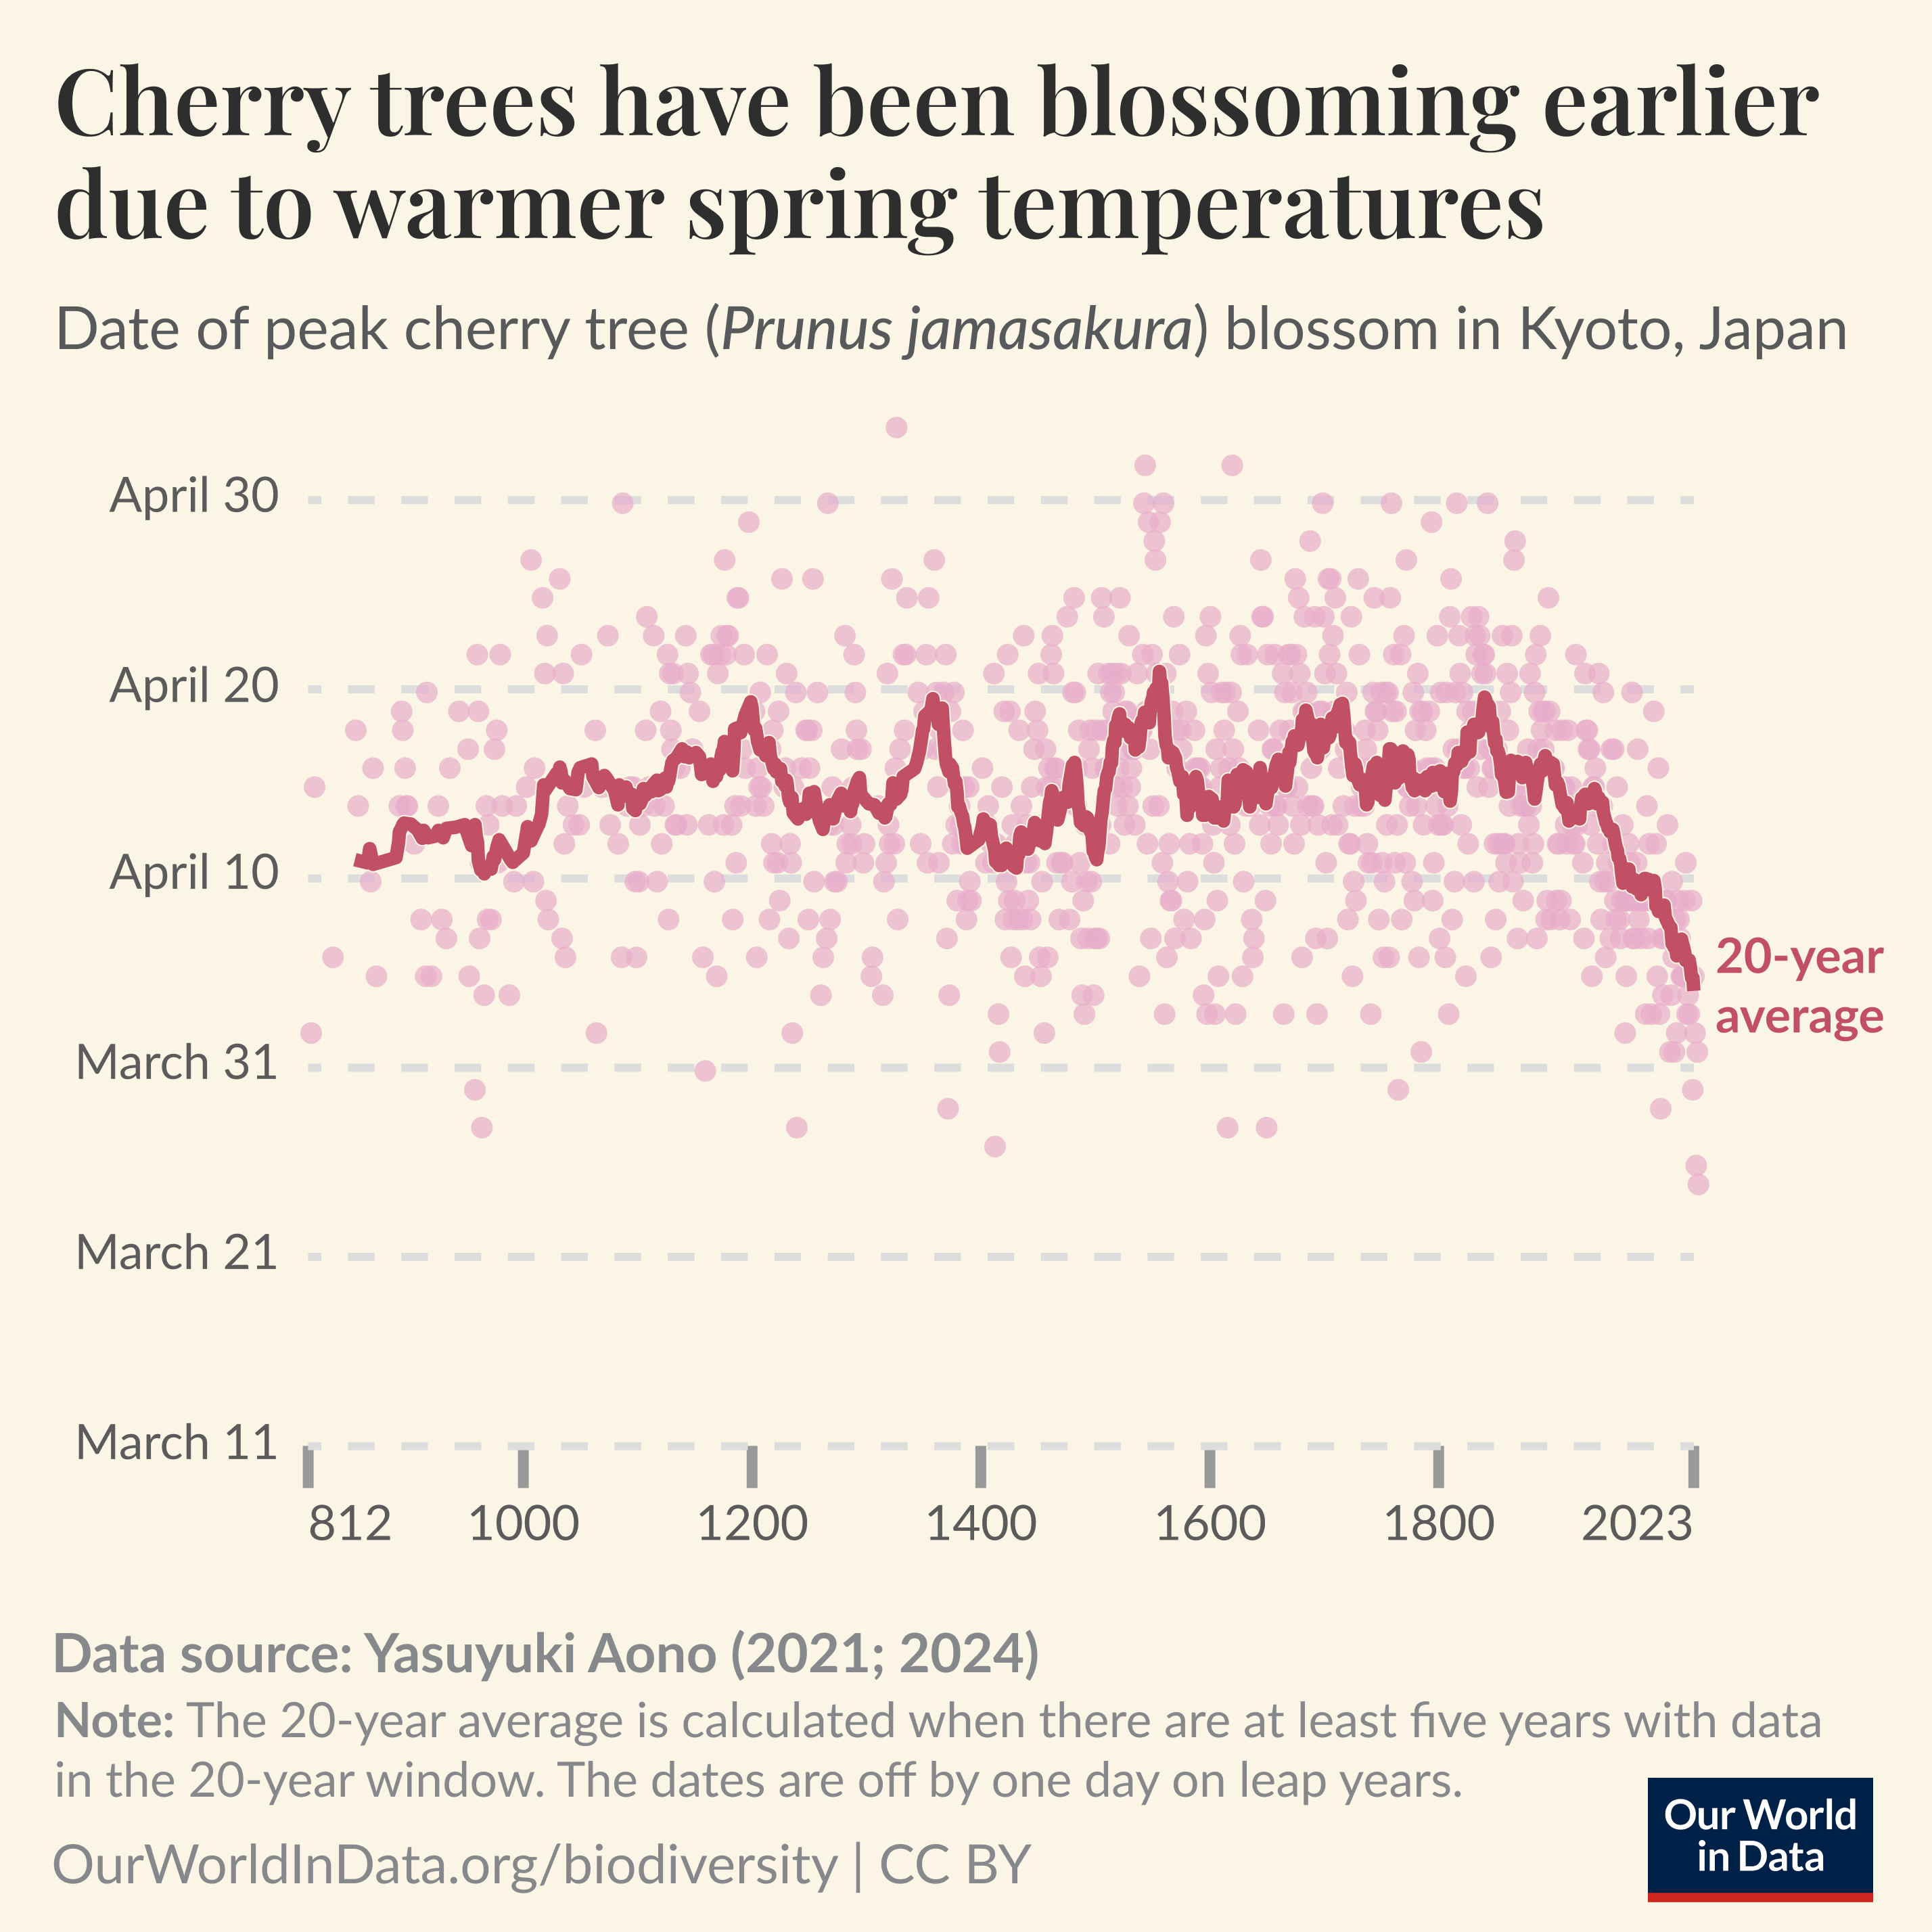 Japan’s cherry trees have been blossoming earlier due to warmer spring temperatures